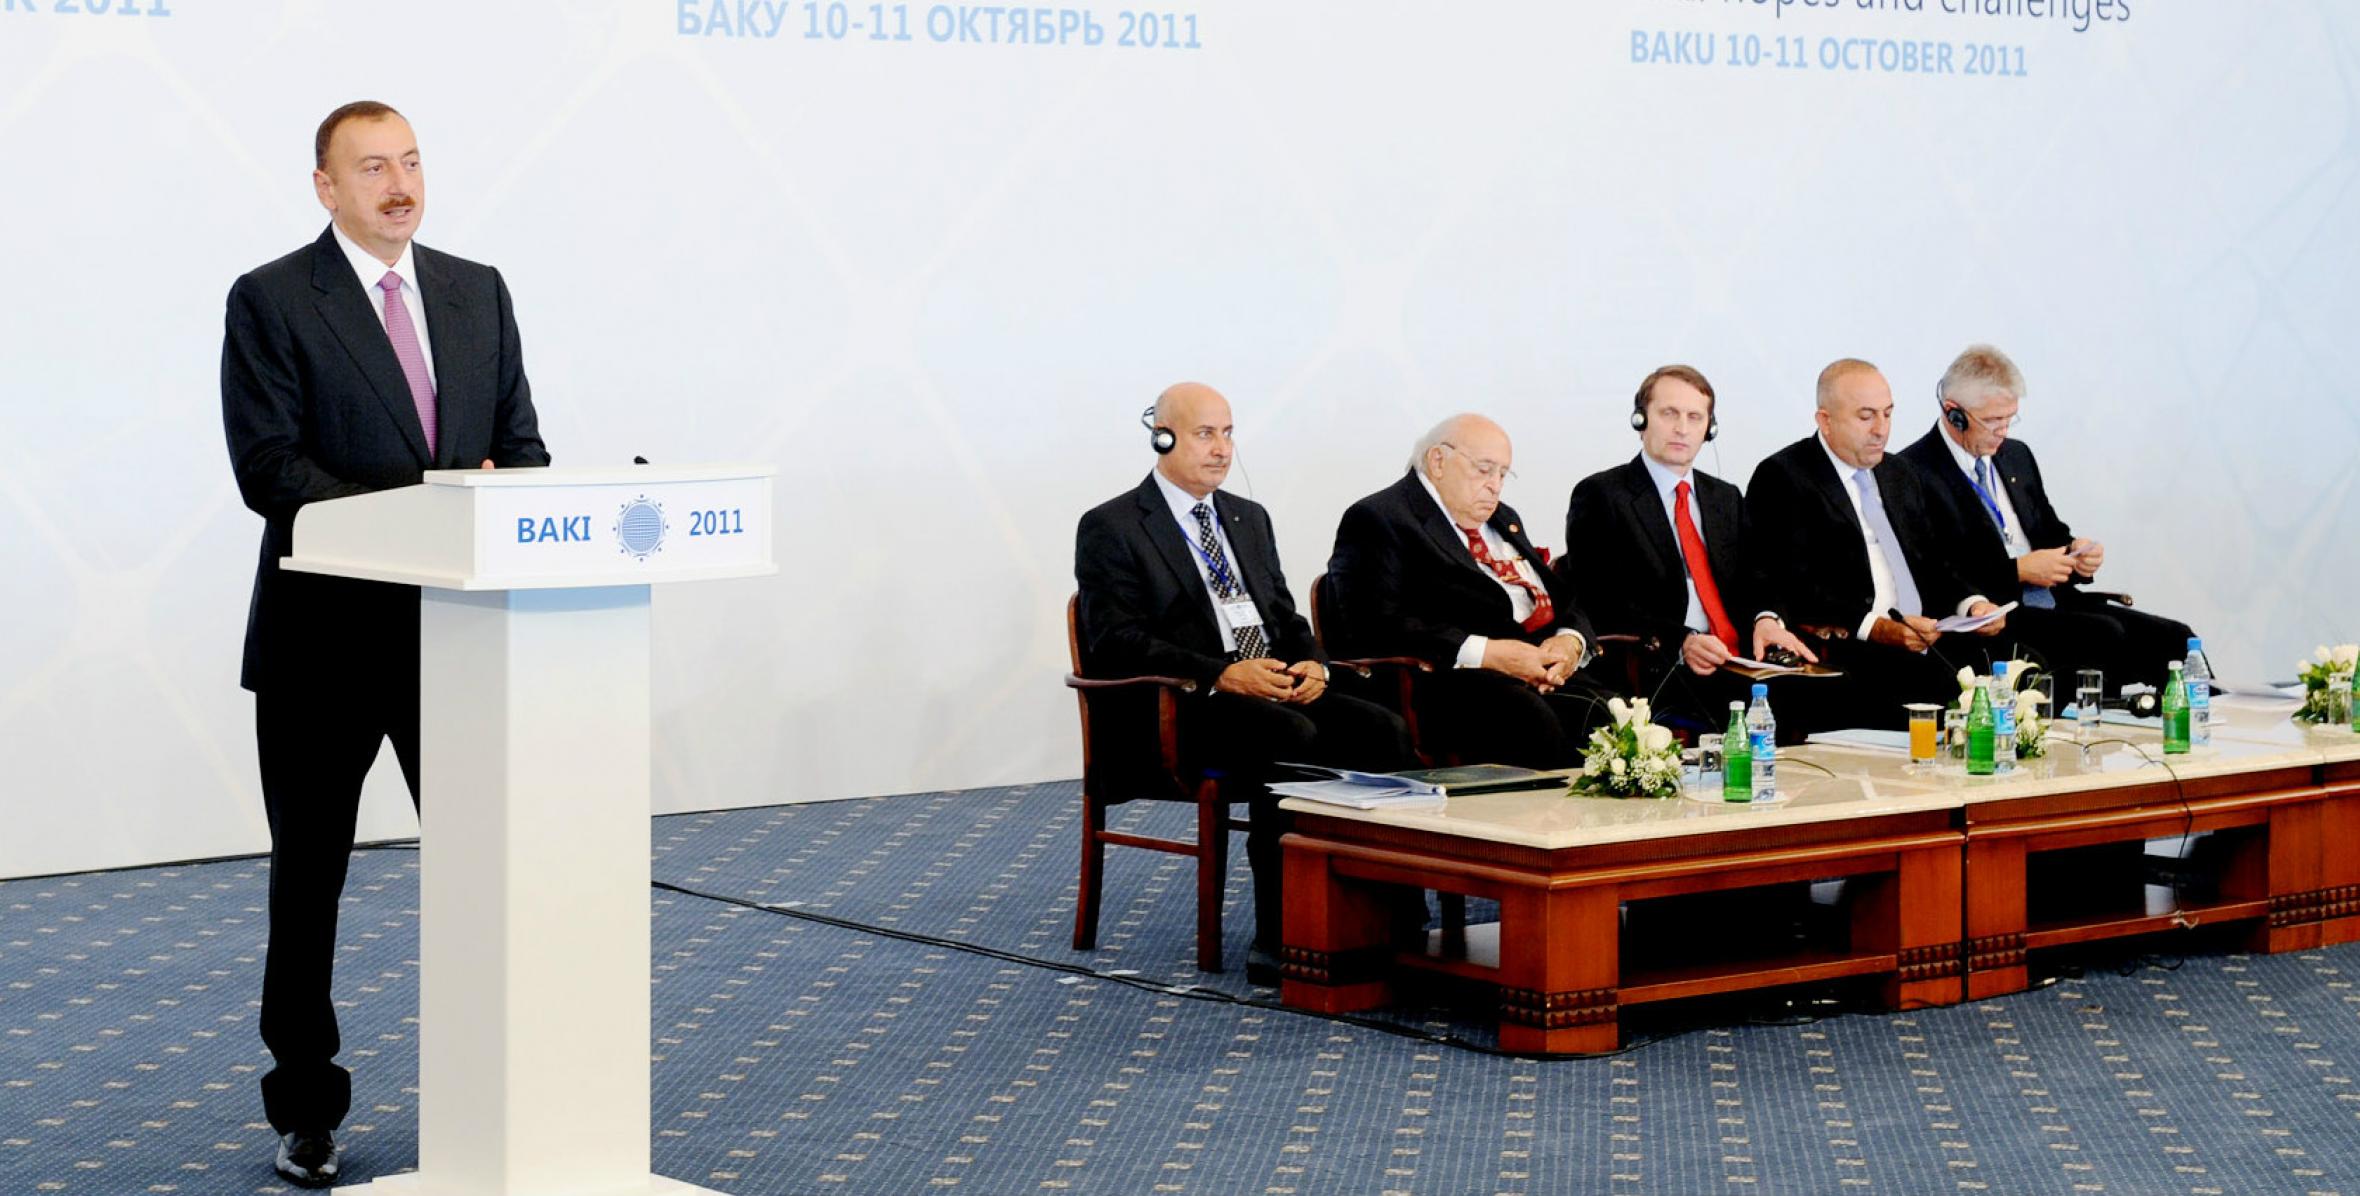 Ilham Aliyev attended the opening of the International Humanitarian Forum